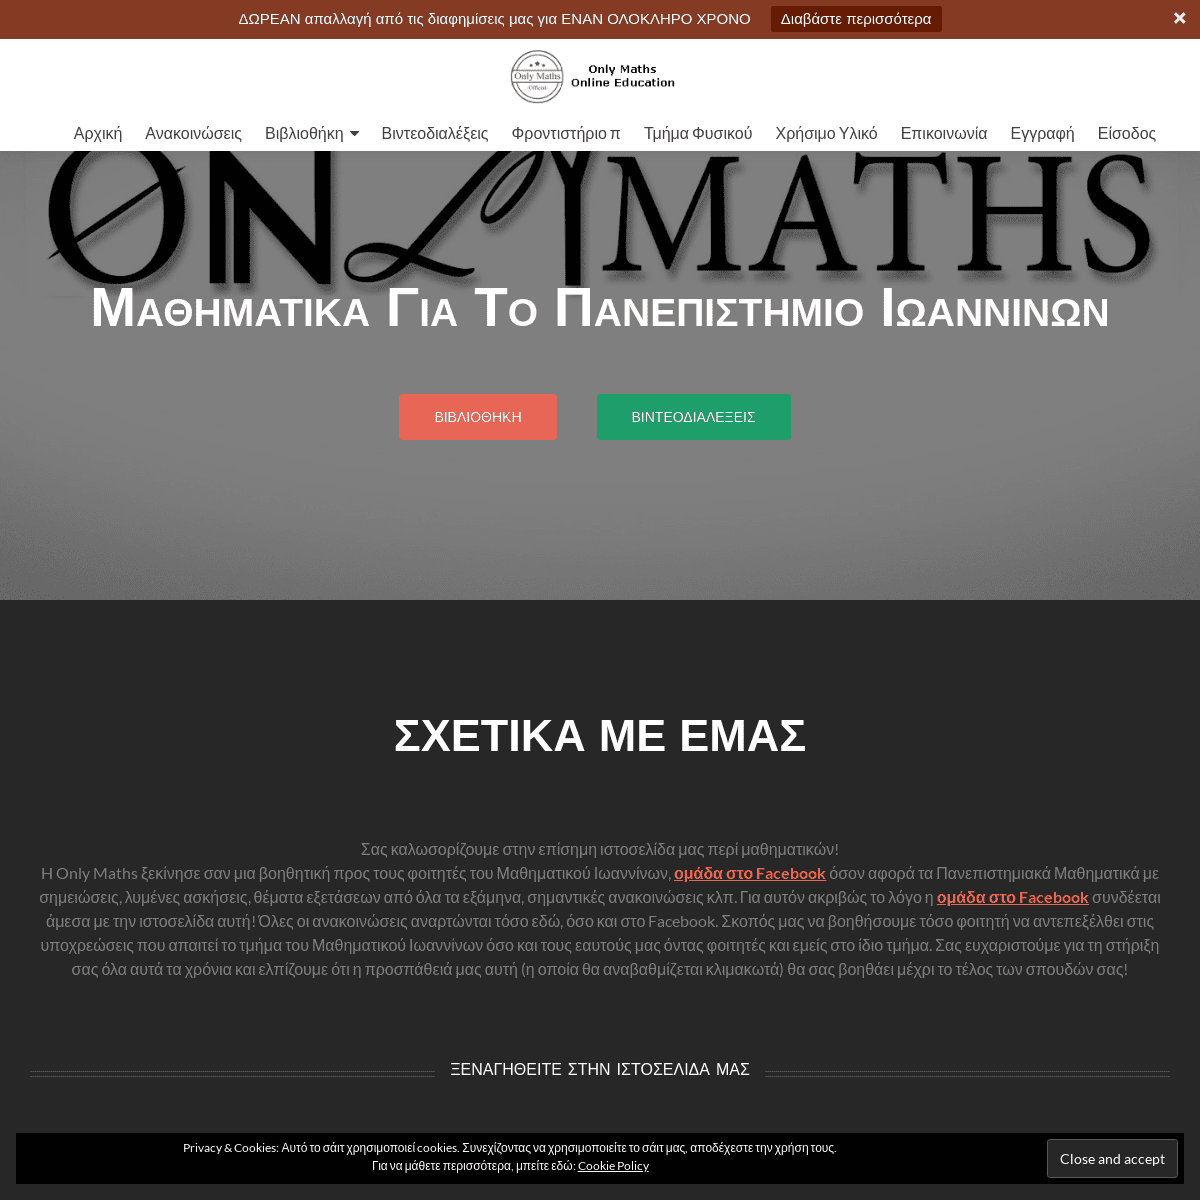 A complete backup of onlymaths.gr